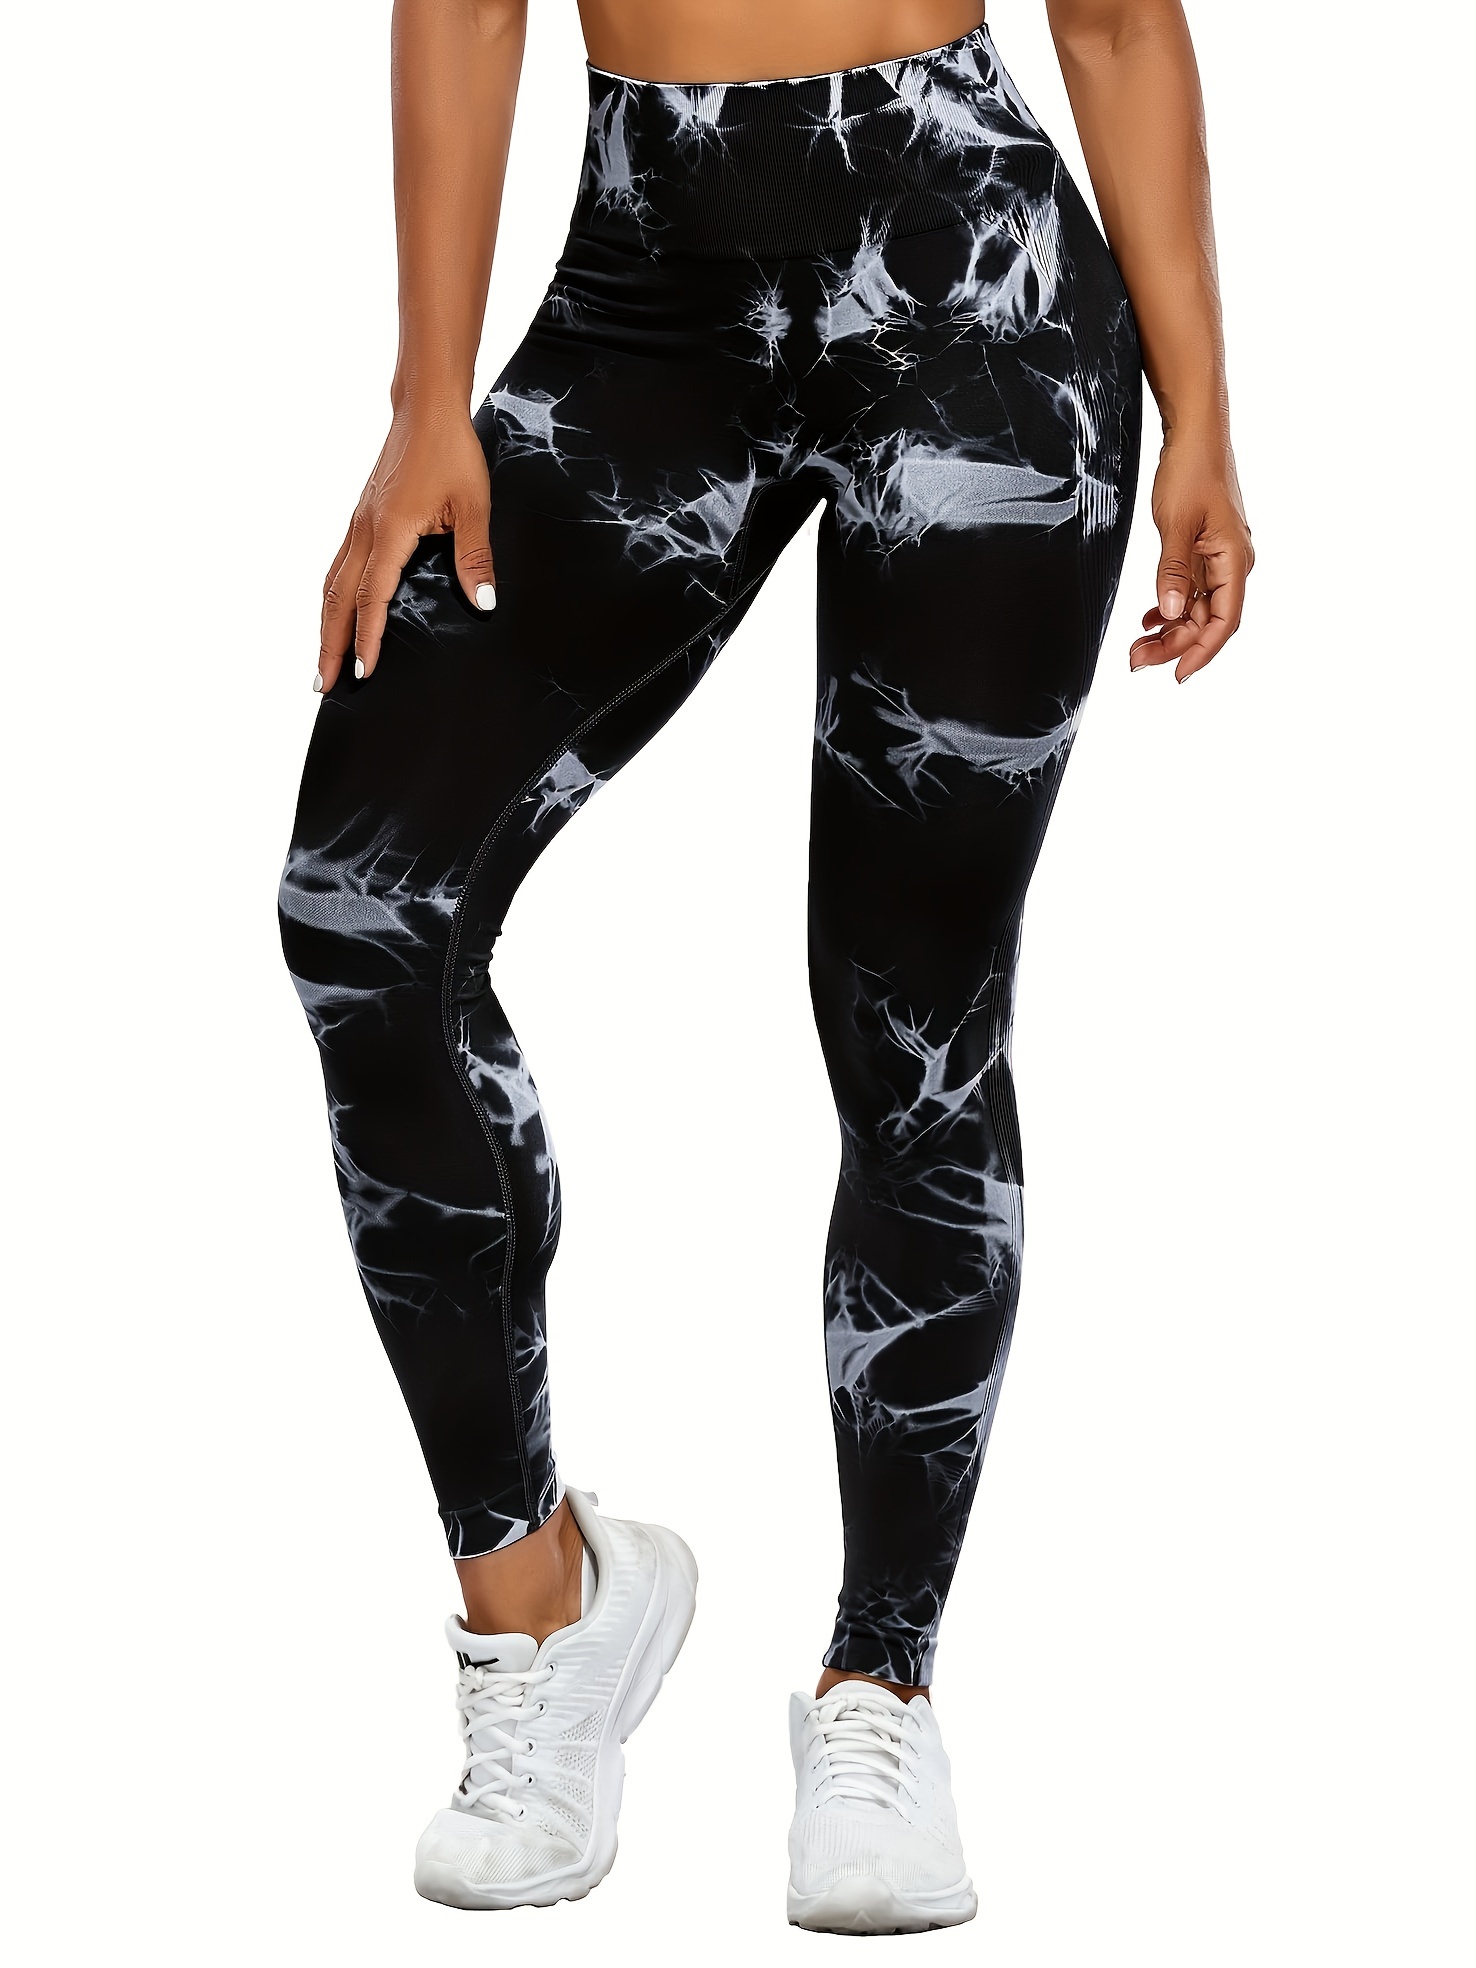 xatos Leggings with Pockets for Women High Waisted Tummy Control Tie Dye  Yoga Pants Workout Athletic Compression Tights Black at  Women's  Clothing store